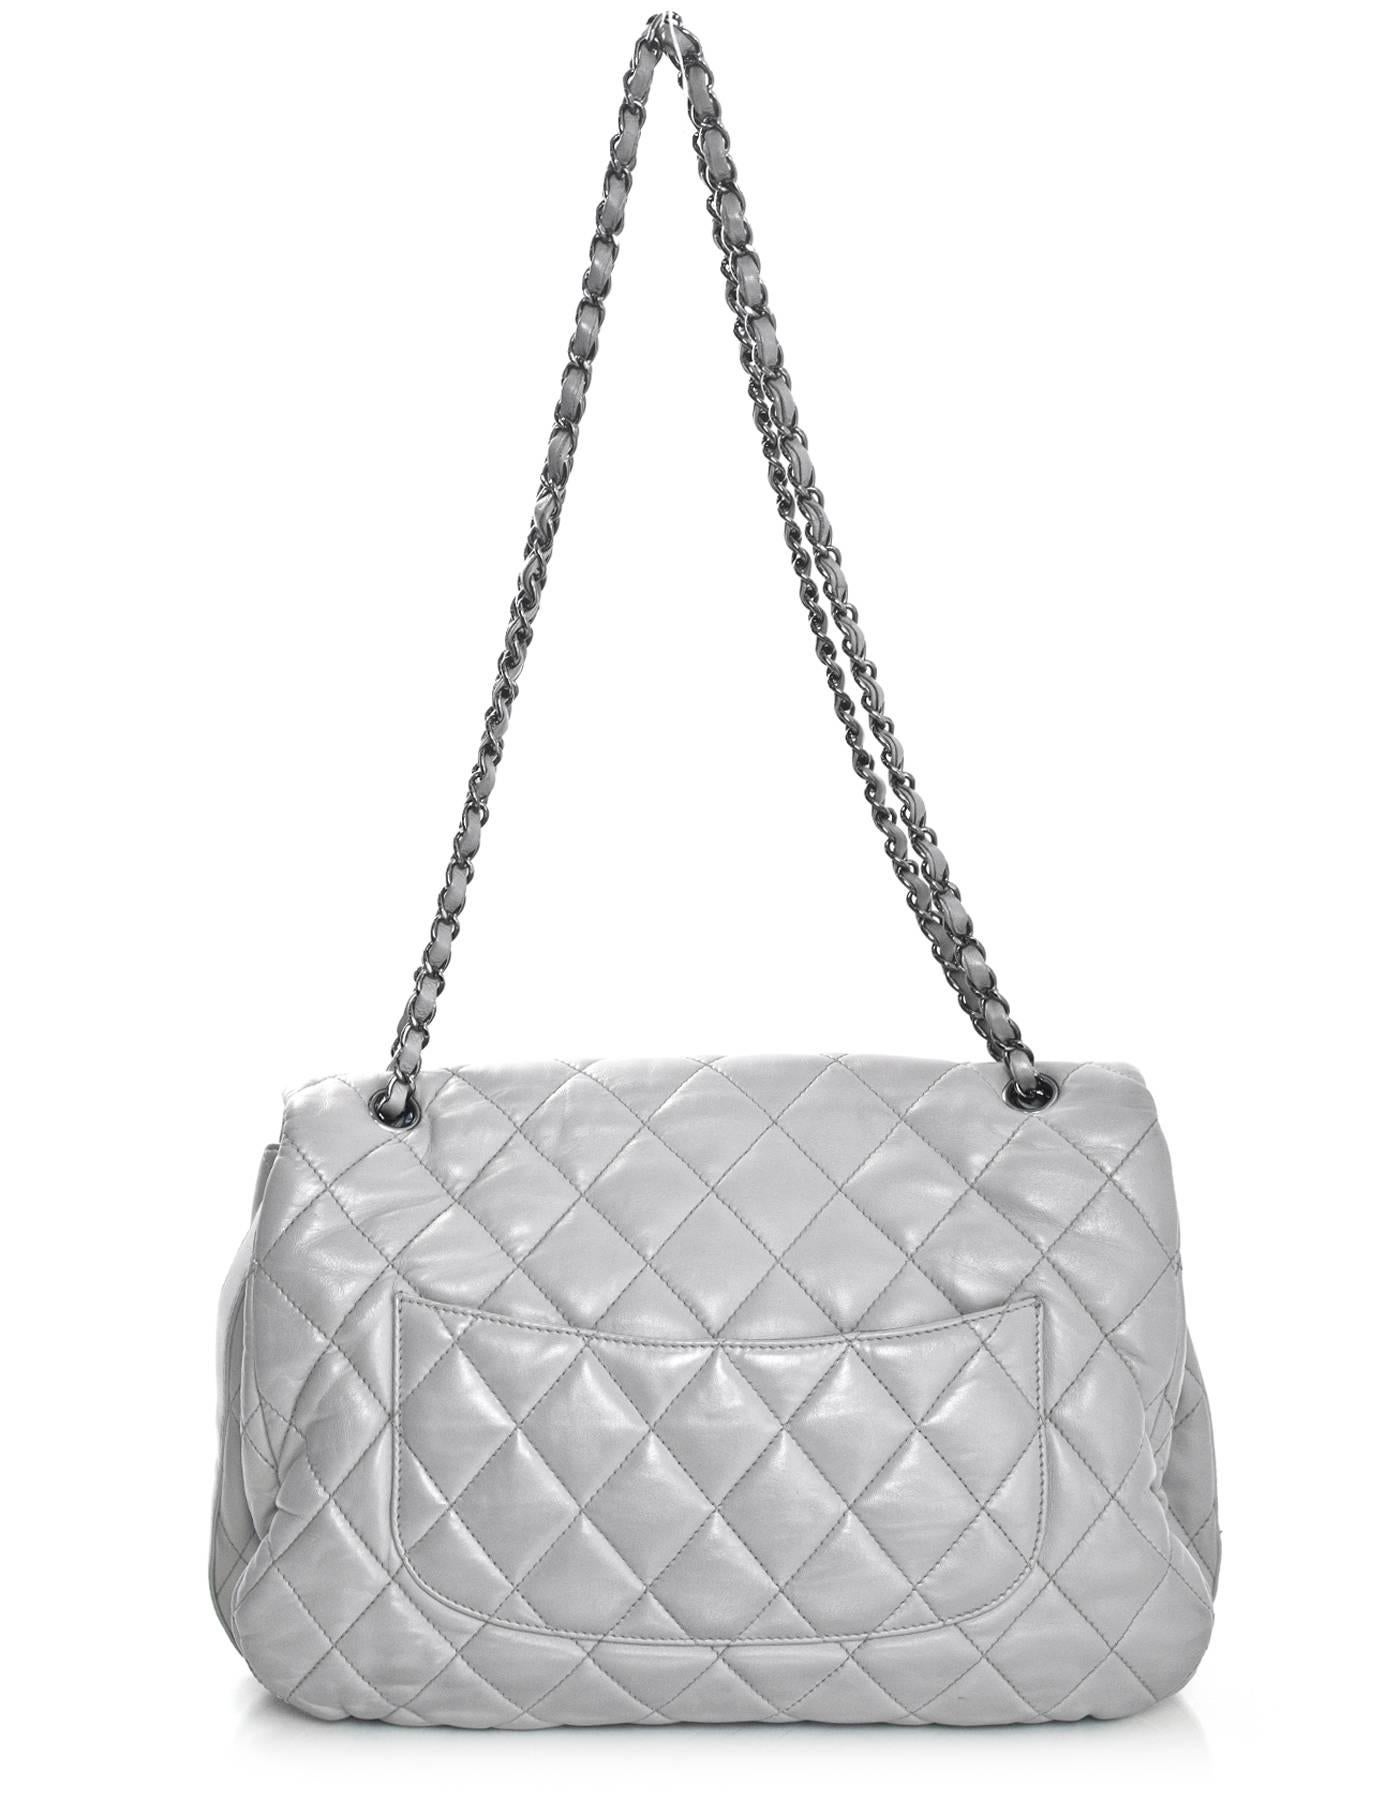 Chanel Grey Quilted Lambskin Maxi Chanel 3 Accordion Flap Bag
Features adjustable shoulder straps

Made In: Italy
Year of Production: 2011
Color: Grey
Hardware: Ruthenium
Materials: Leather
Lining: Charcoal satin
Closure/Opening: Flap top with CC